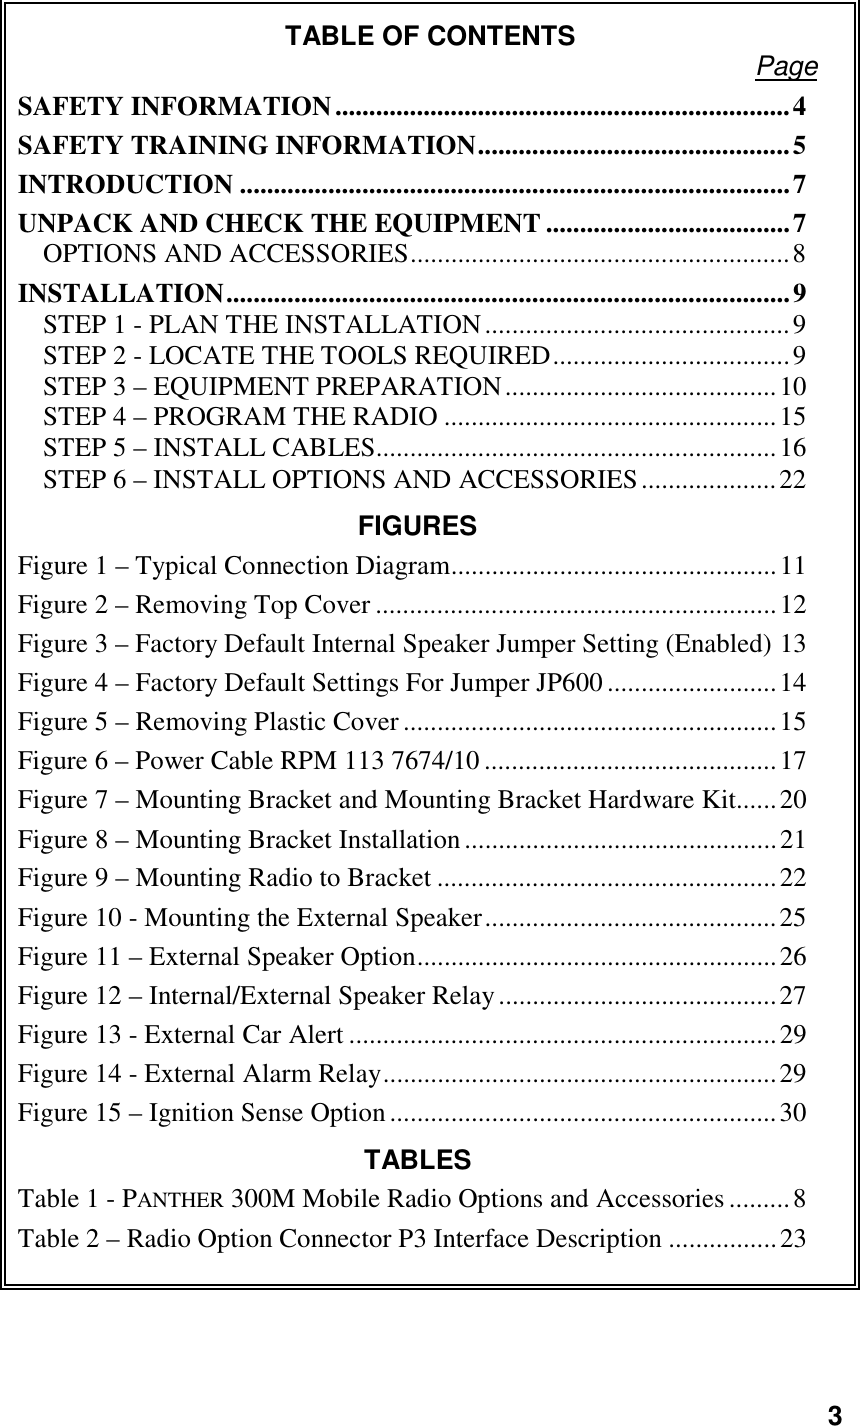 3TABLE OF CONTENTS PageSAFETY INFORMATION...................................................................4SAFETY TRAINING INFORMATION..............................................5INTRODUCTION .................................................................................7UNPACK AND CHECK THE EQUIPMENT ....................................7OPTIONS AND ACCESSORIES........................................................8INSTALLATION...................................................................................9STEP 1 - PLAN THE INSTALLATION.............................................9STEP 2 - LOCATE THE TOOLS REQUIRED...................................9STEP 3 – EQUIPMENT PREPARATION........................................10STEP 4 – PROGRAM THE RADIO .................................................15STEP 5 – INSTALL CABLES...........................................................16STEP 6 – INSTALL OPTIONS AND ACCESSORIES....................22FIGURESFigure 1 – Typical Connection Diagram................................................11Figure 2 – Removing Top Cover ...........................................................12Figure 3 – Factory Default Internal Speaker Jumper Setting (Enabled) 13Figure 4 – Factory Default Settings For Jumper JP600 .........................14Figure 5 – Removing Plastic Cover .......................................................15Figure 6 – Power Cable RPM 113 7674/10...........................................17Figure 7 – Mounting Bracket and Mounting Bracket Hardware Kit......20Figure 8 – Mounting Bracket Installation..............................................21Figure 9 – Mounting Radio to Bracket ..................................................22Figure 10 - Mounting the External Speaker...........................................25Figure 11 – External Speaker Option.....................................................26Figure 12 – Internal/External Speaker Relay.........................................27Figure 13 - External Car Alert ...............................................................29Figure 14 - External Alarm Relay..........................................................29Figure 15 – Ignition Sense Option.........................................................30TABLESTable 1 - PANTHER 300M Mobile Radio Options and Accessories.........8Table 2 – Radio Option Connector P3 Interface Description ................23